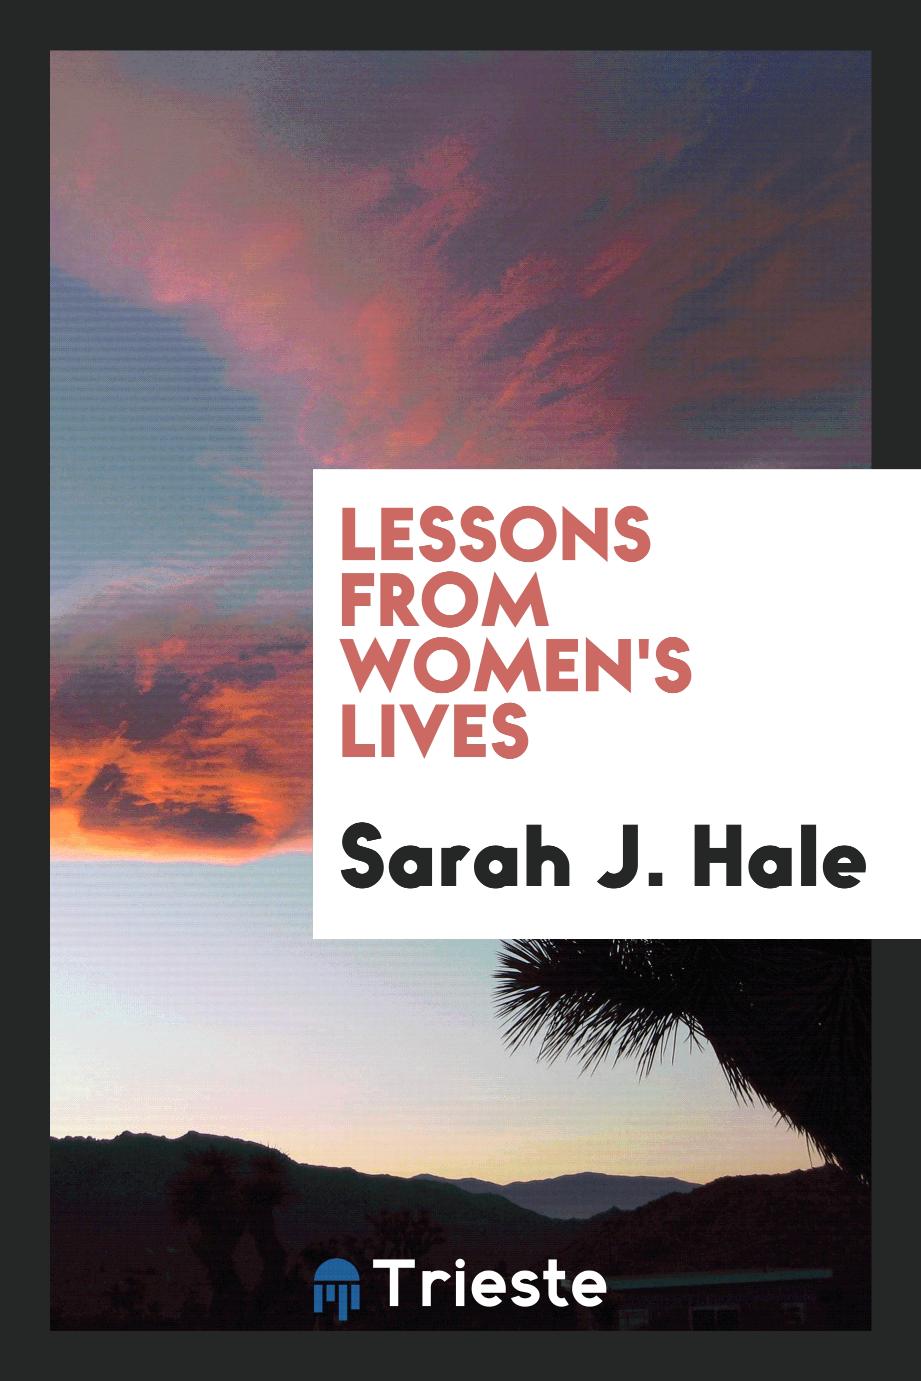 Lessons from women's lives